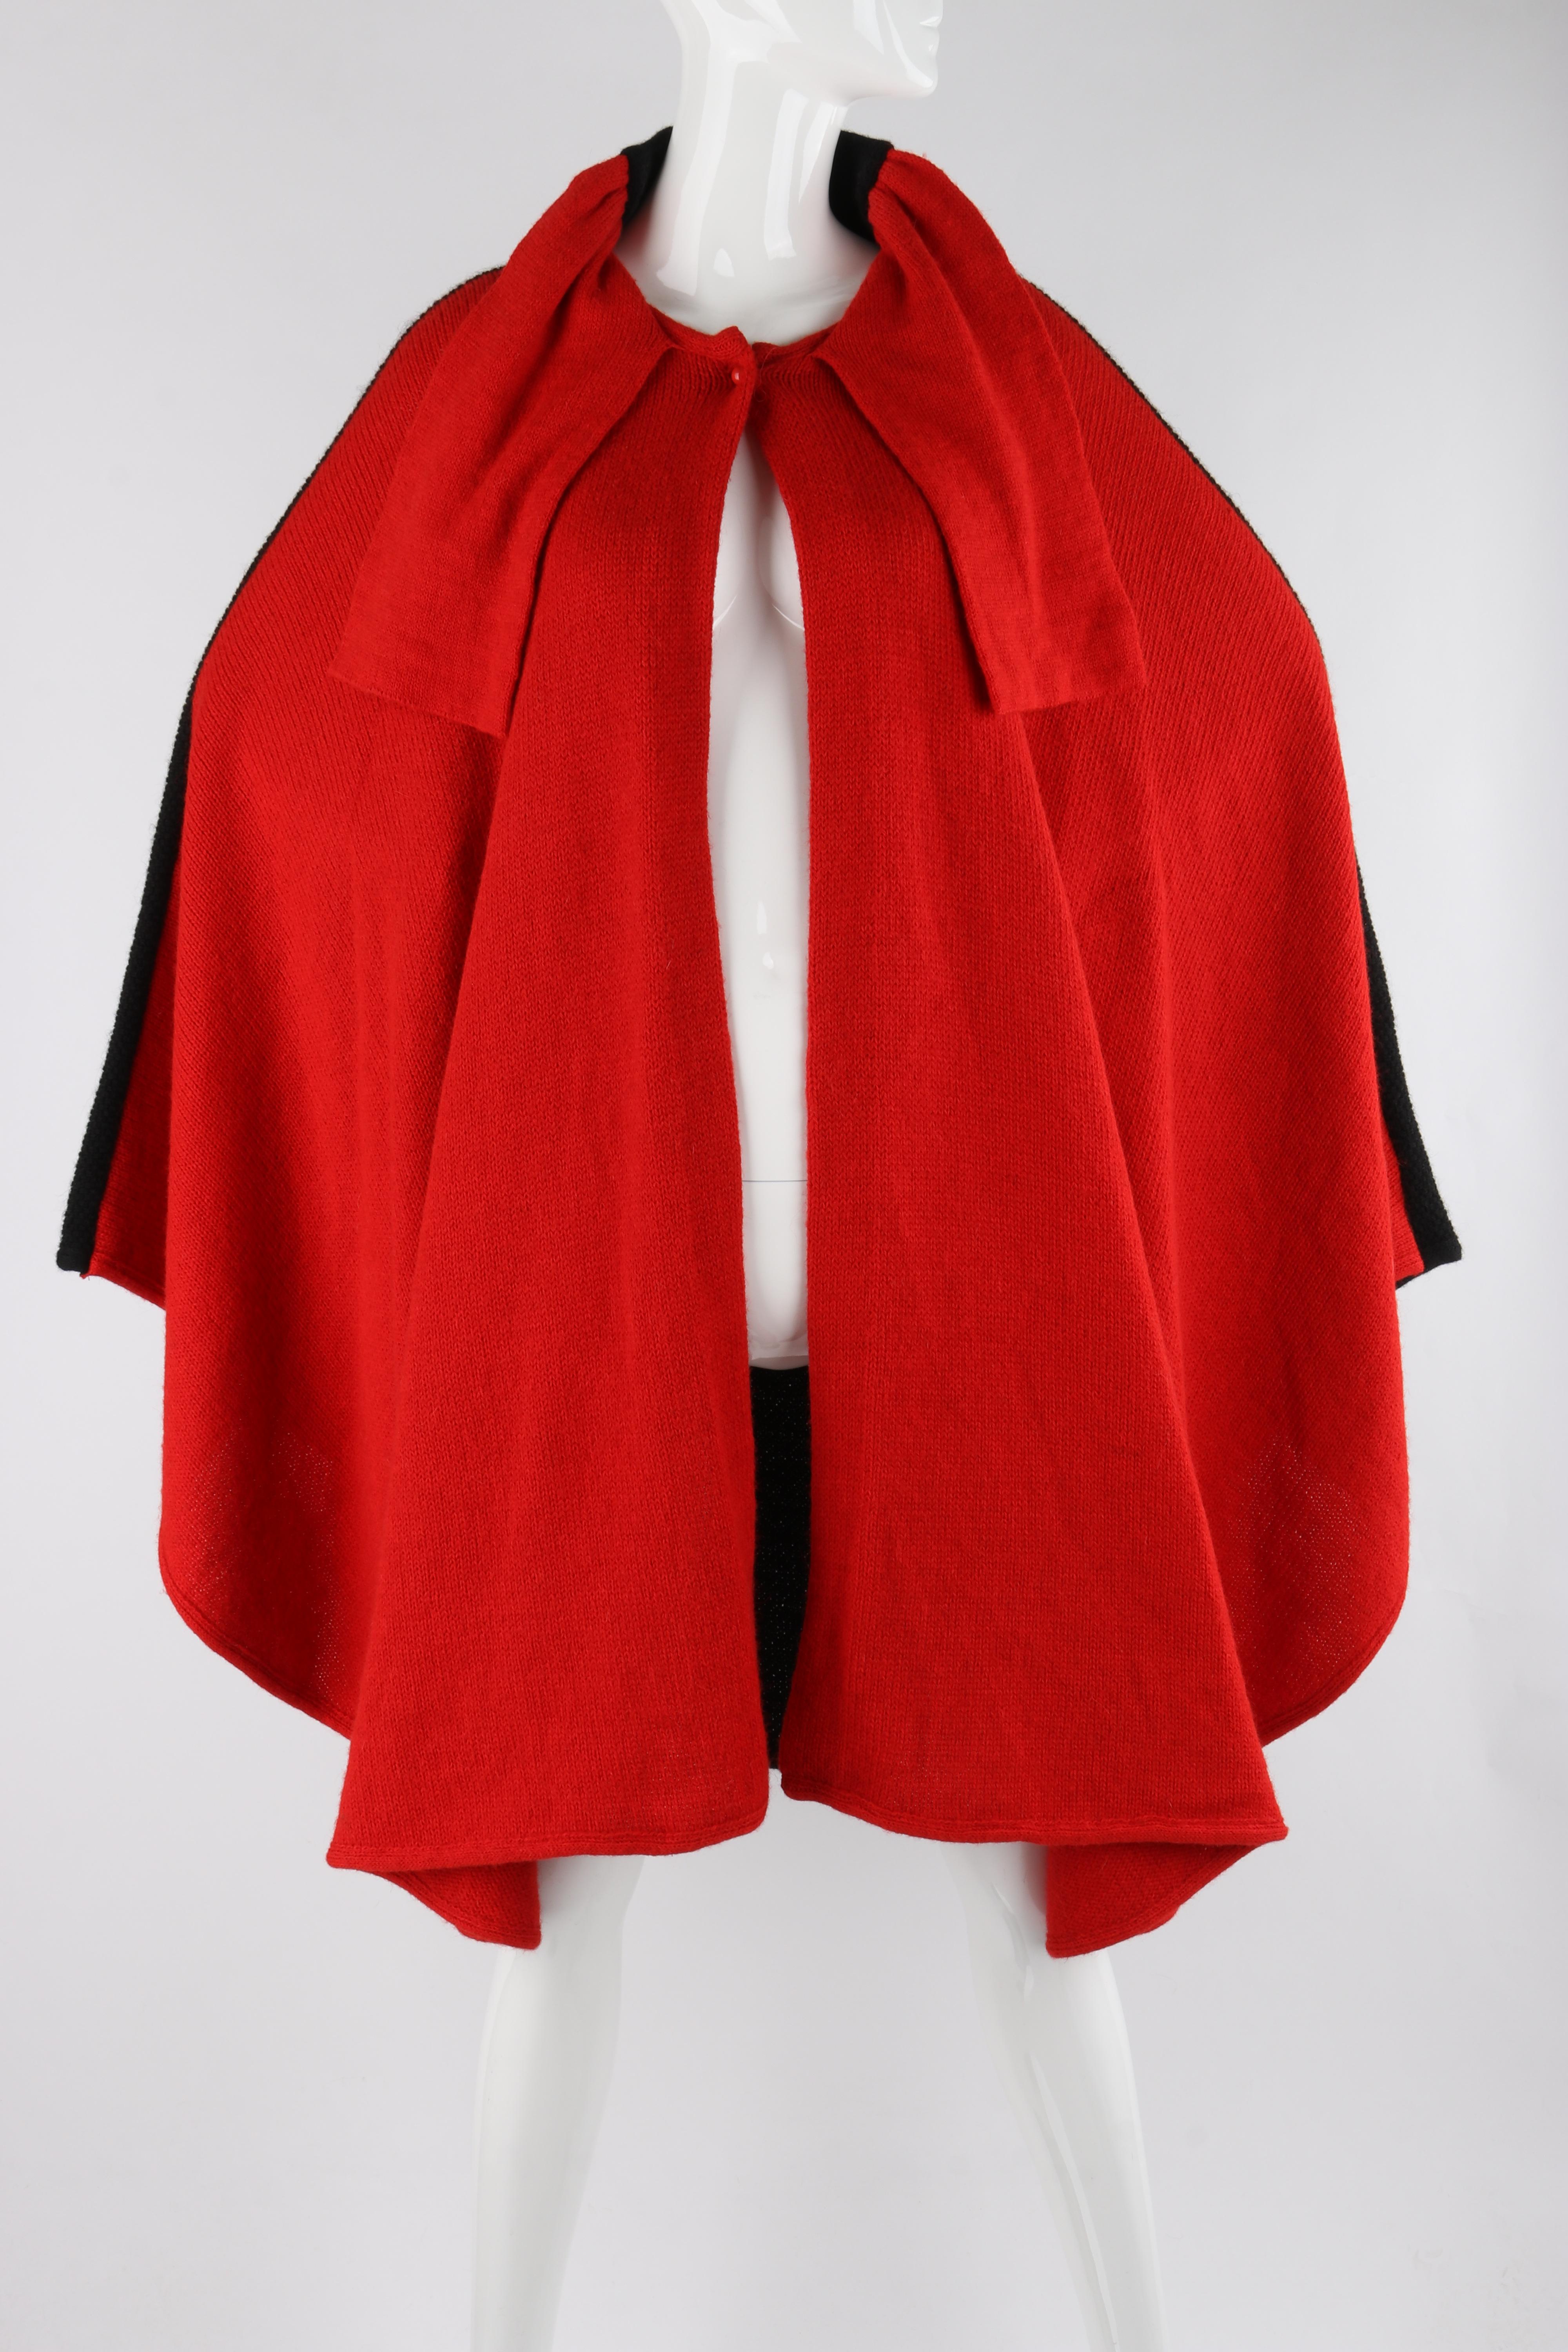 VALENTINO Knitwear c.1980's Vtg Red Black Alpaca Wool Knit Scarf Tie Button Cape For Sale 2